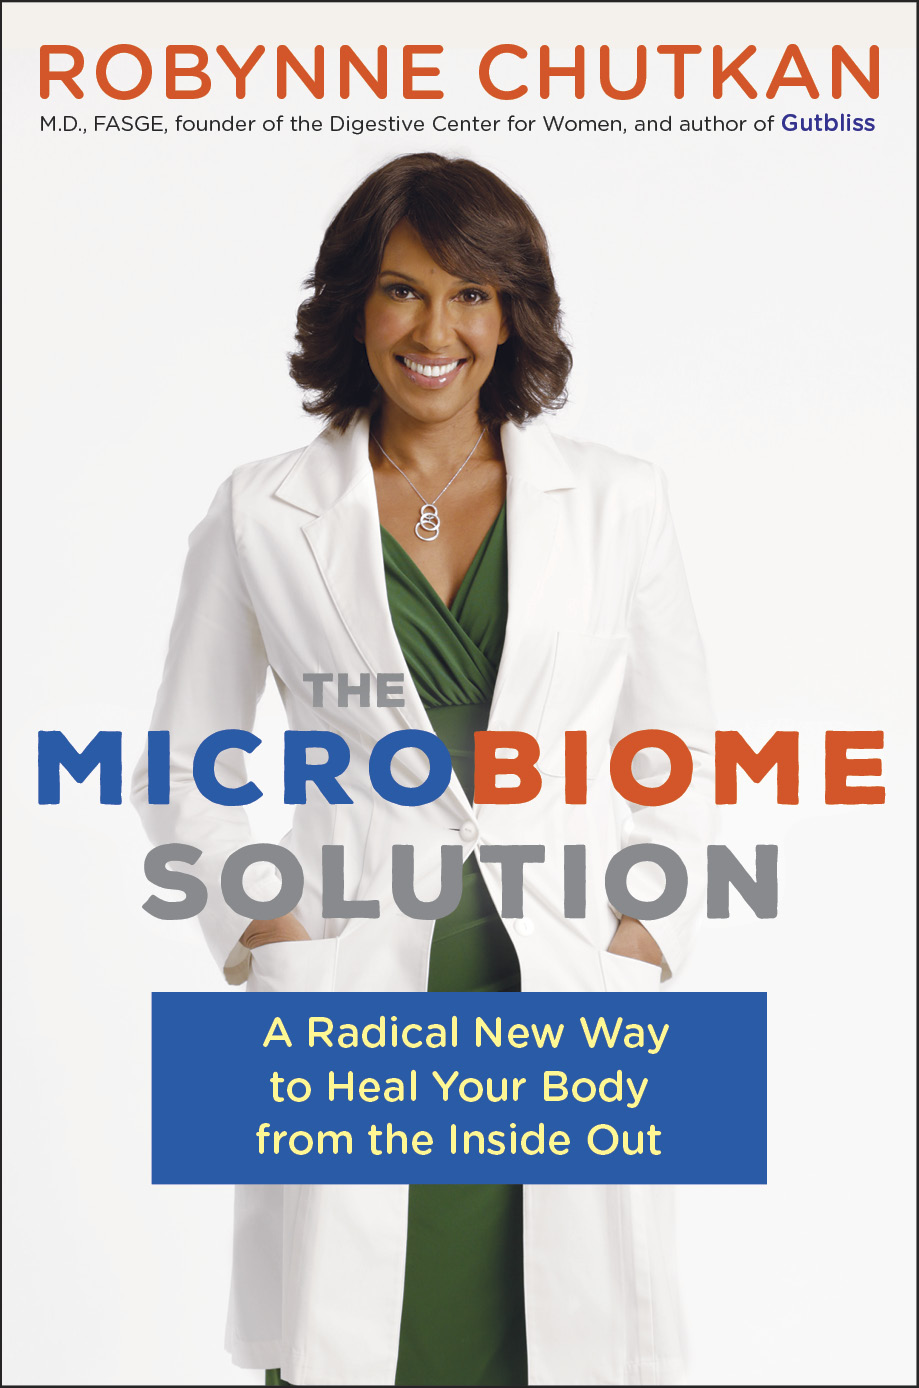 The Microbiome Solution by Dr Robynne Chutkan